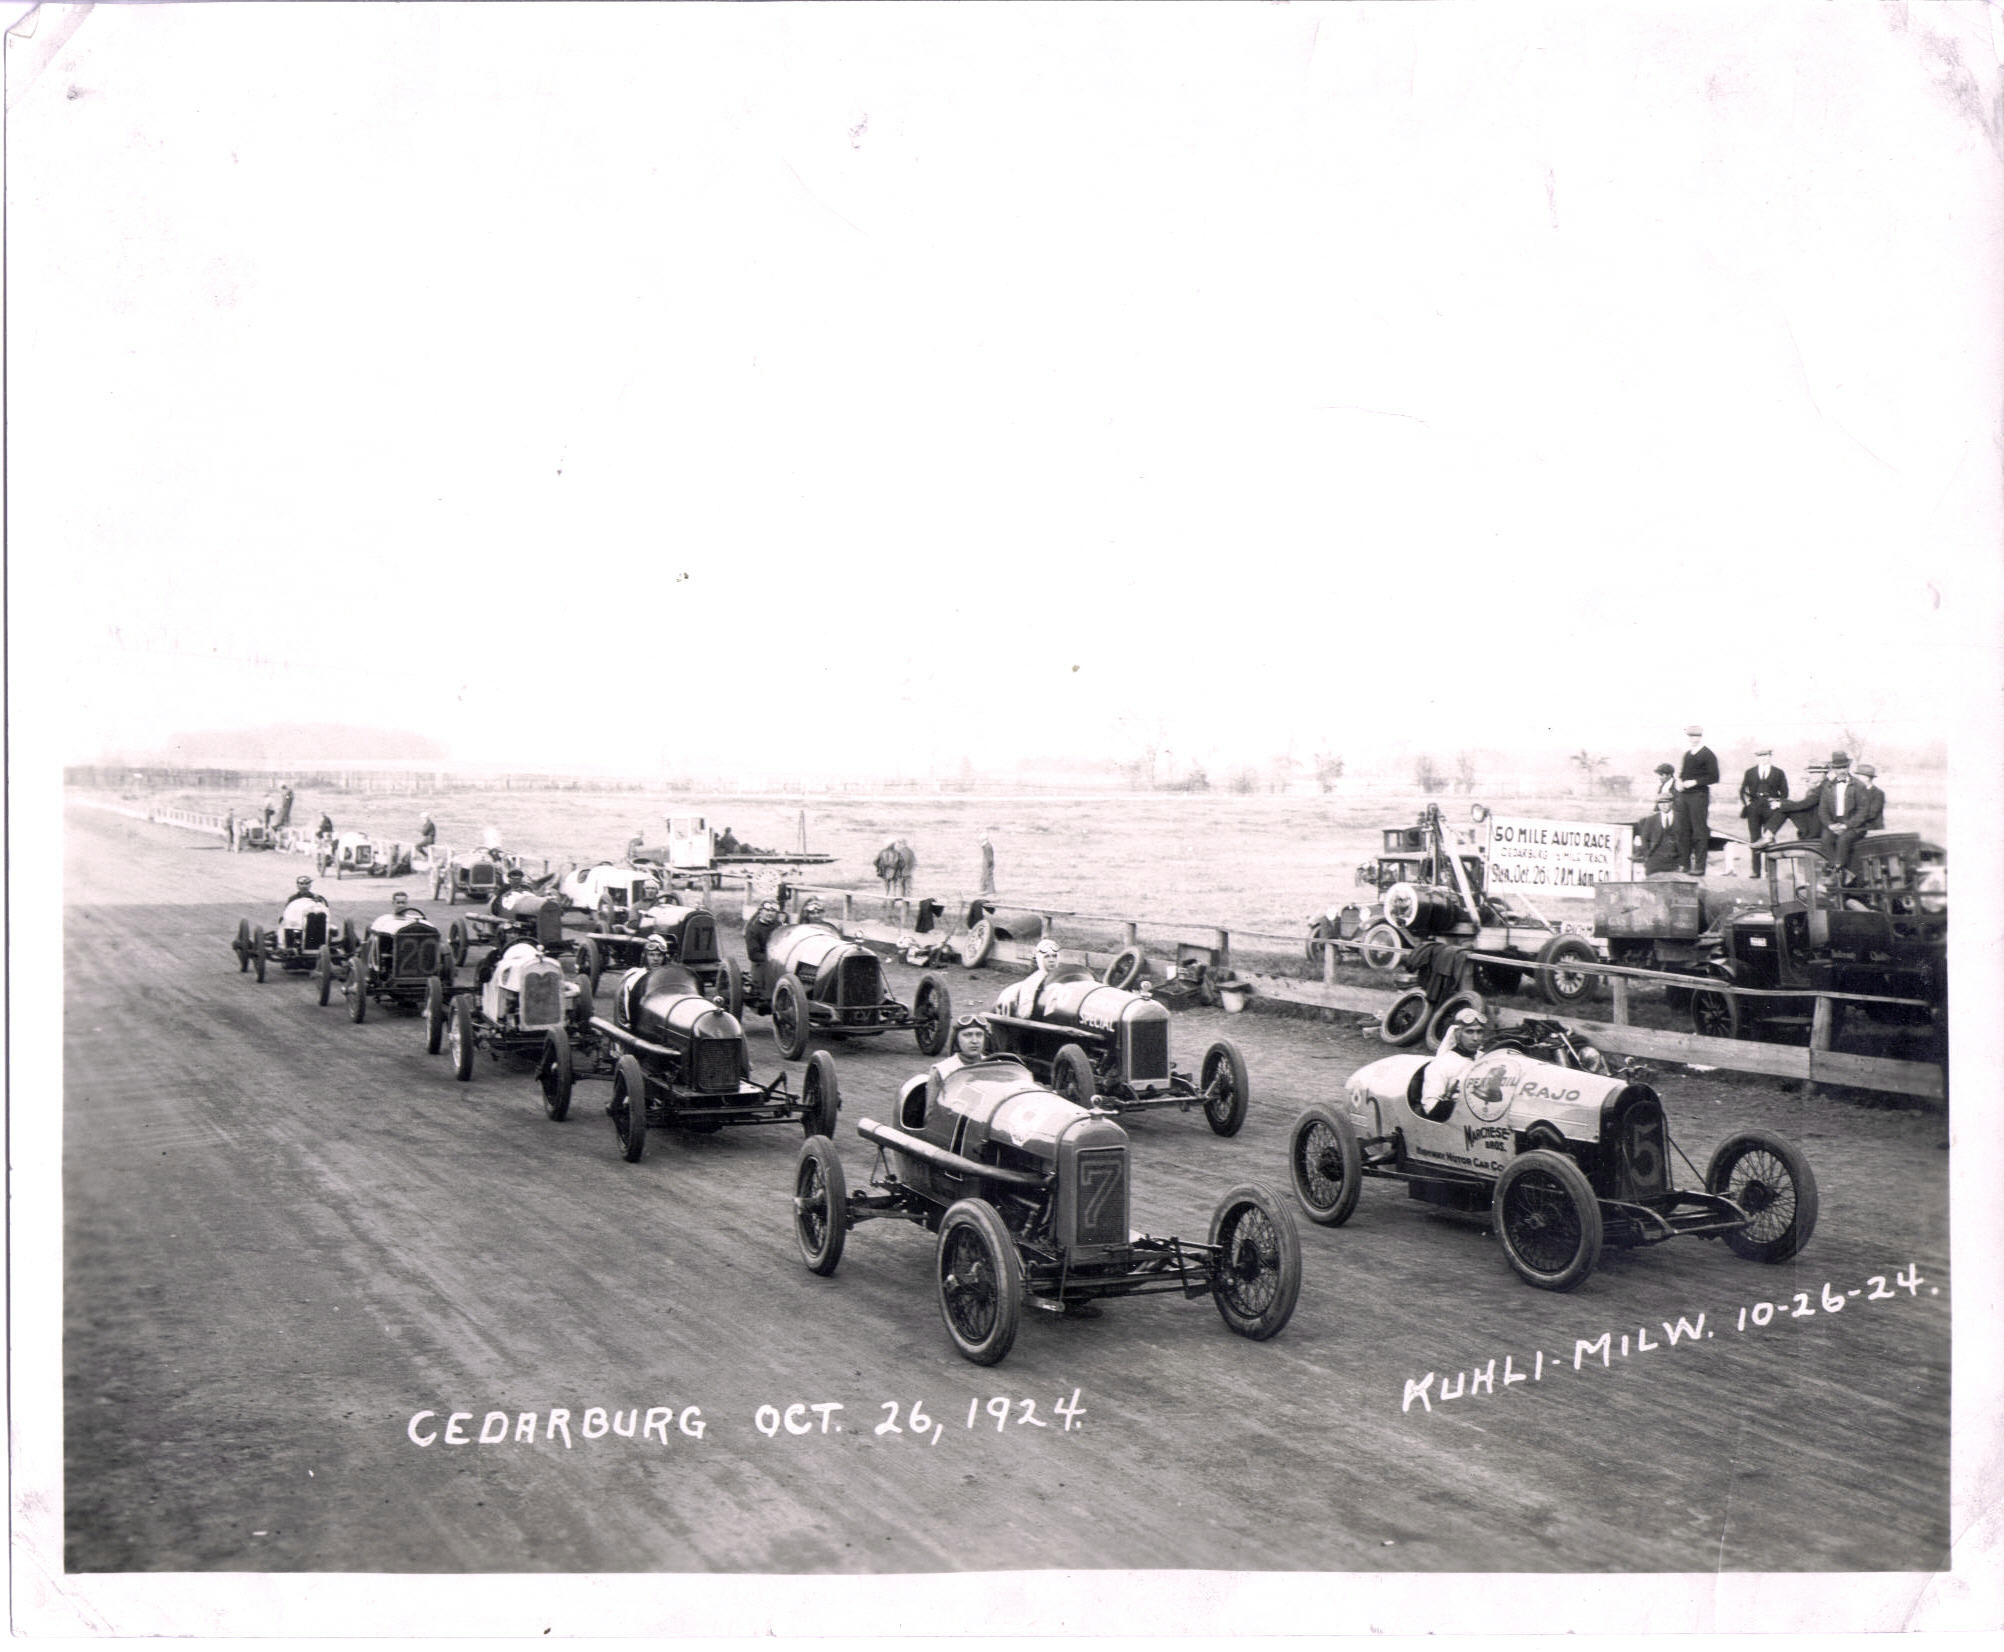 As dangerous as auto racing is today, races in the early days were even more so.  Note the unbanked dirt track and the open cockpit in these cars.  

That's my great, great Uncle Willie driving the Fronty Ford marked with a 7.  Apparently, he held a few local records on the 50-mile dirt track. This is from 1924 in Cedarburg, Wisconsin - a suburb of Milwaukee. View full size.